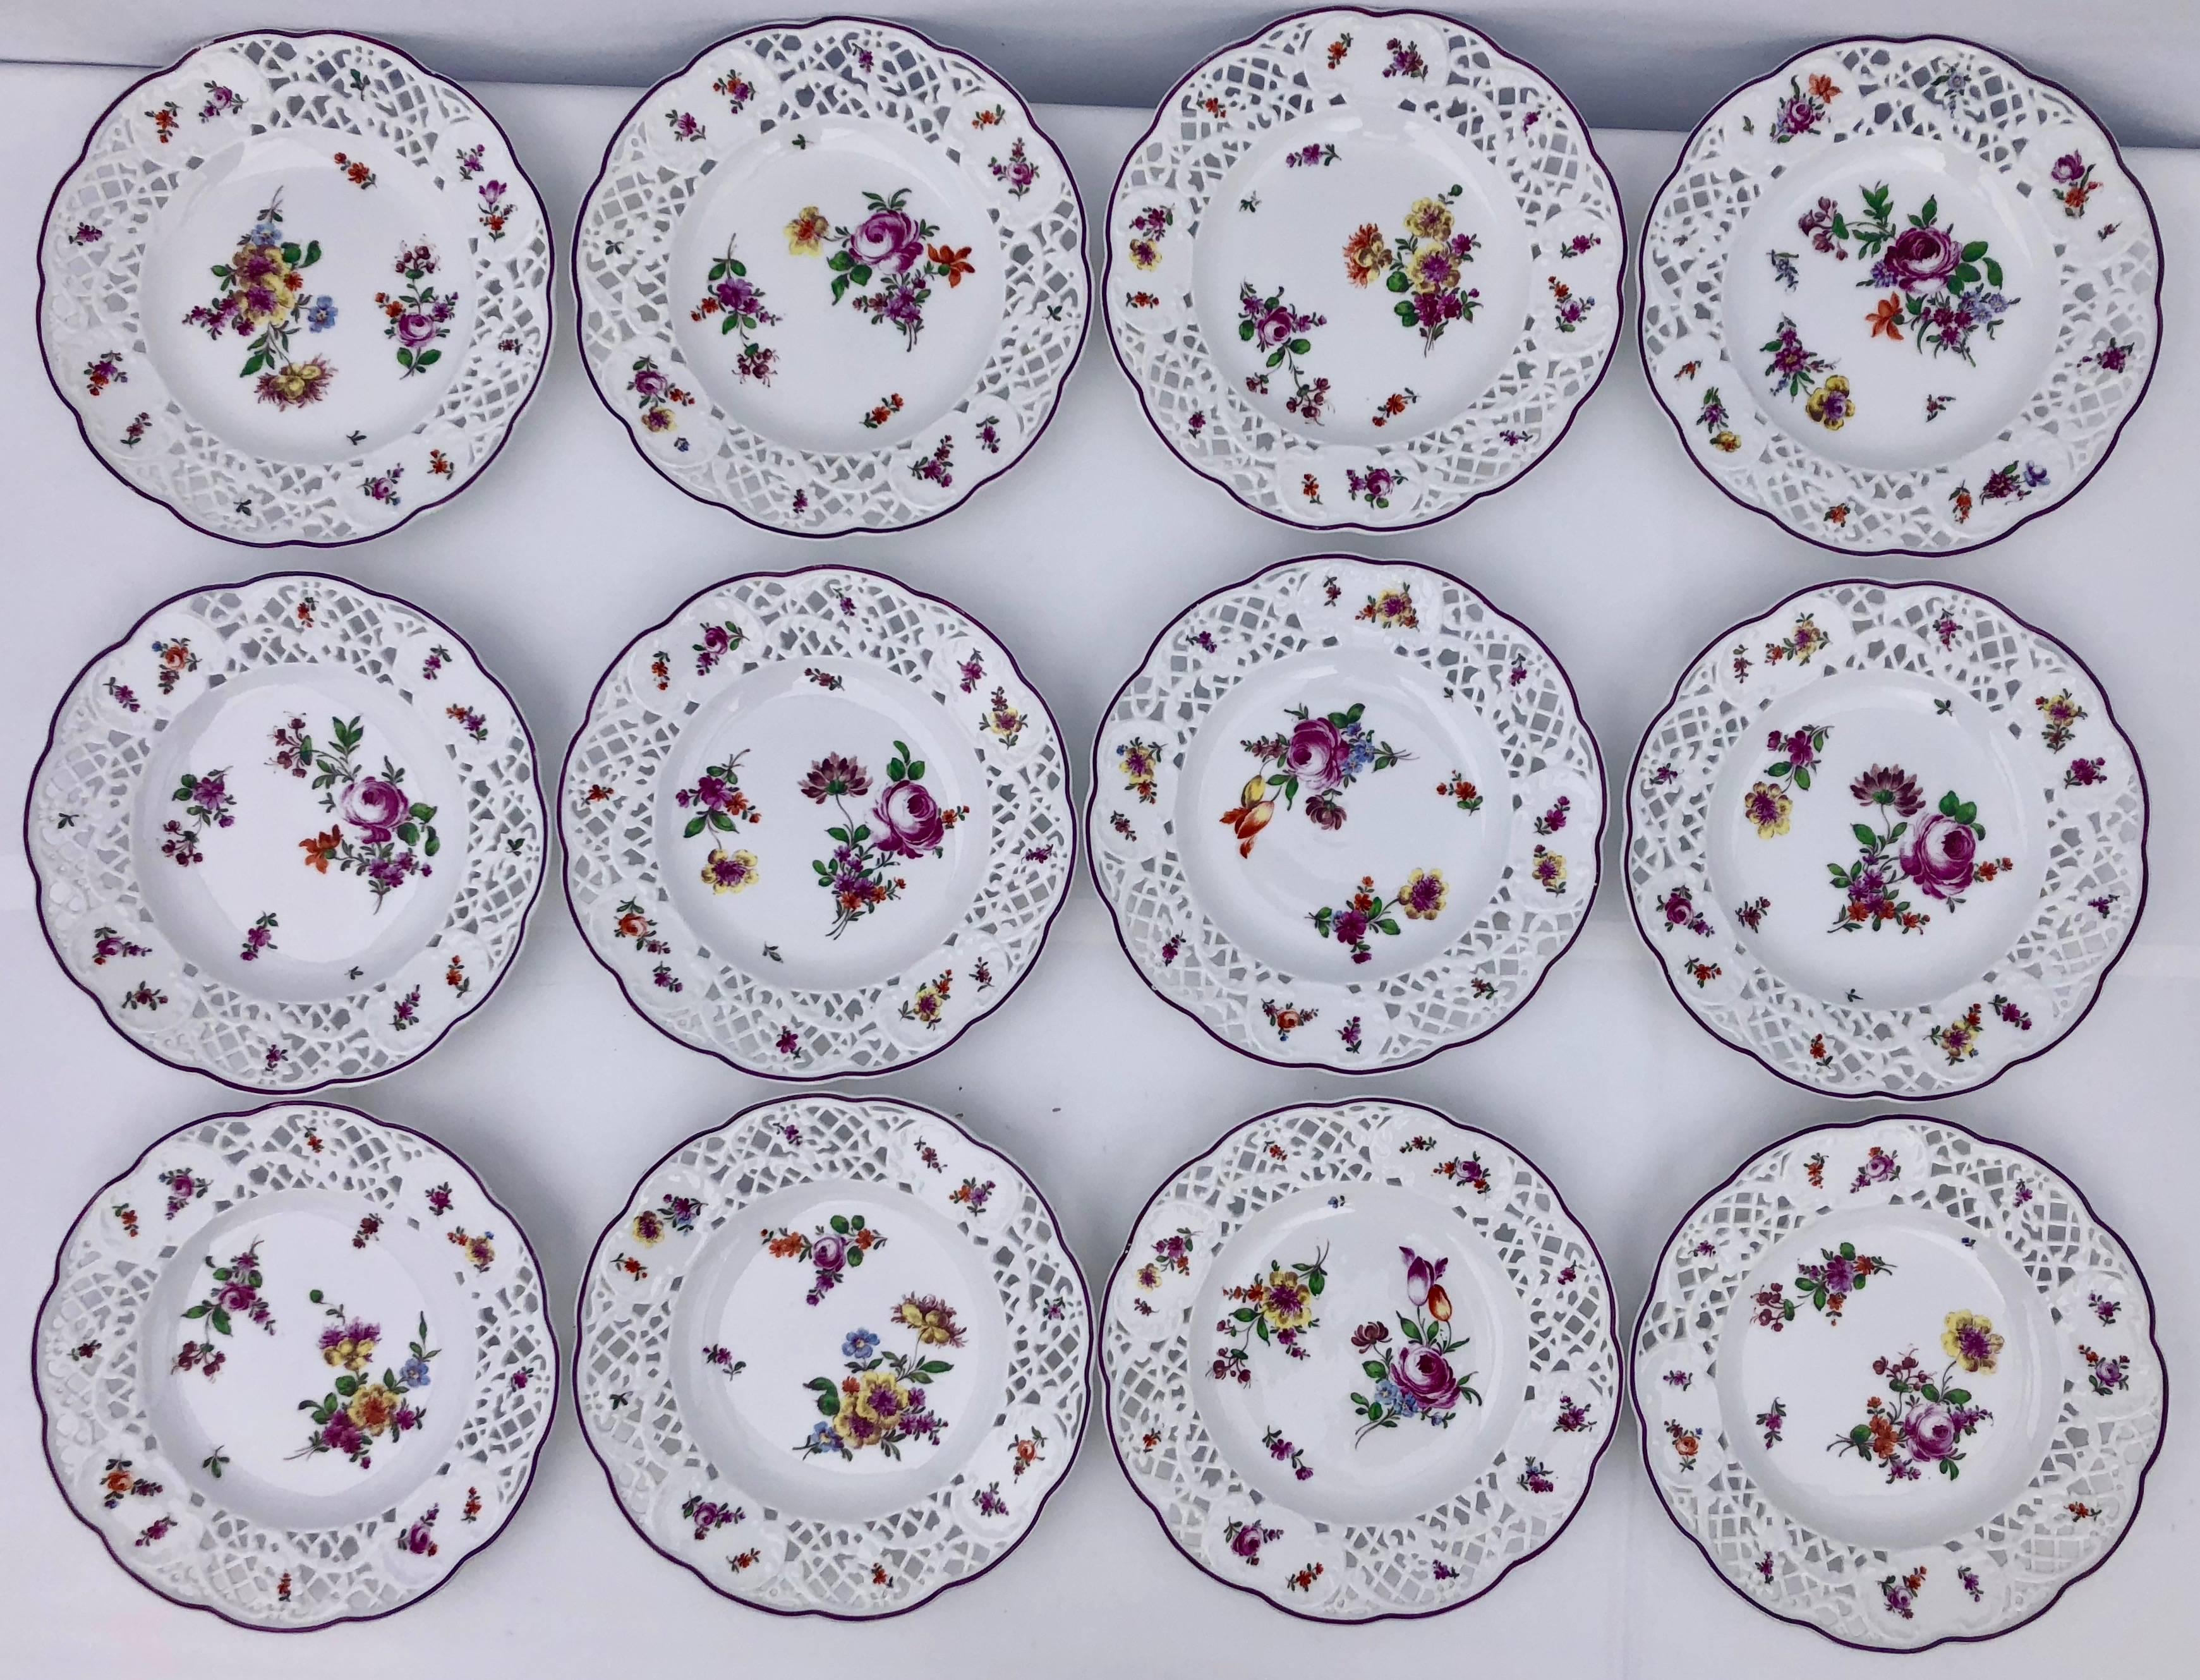 24 Meissen Plates with Reticulated Borders and Floral Decoration, Early 1900s (Louis XIV.) im Angebot